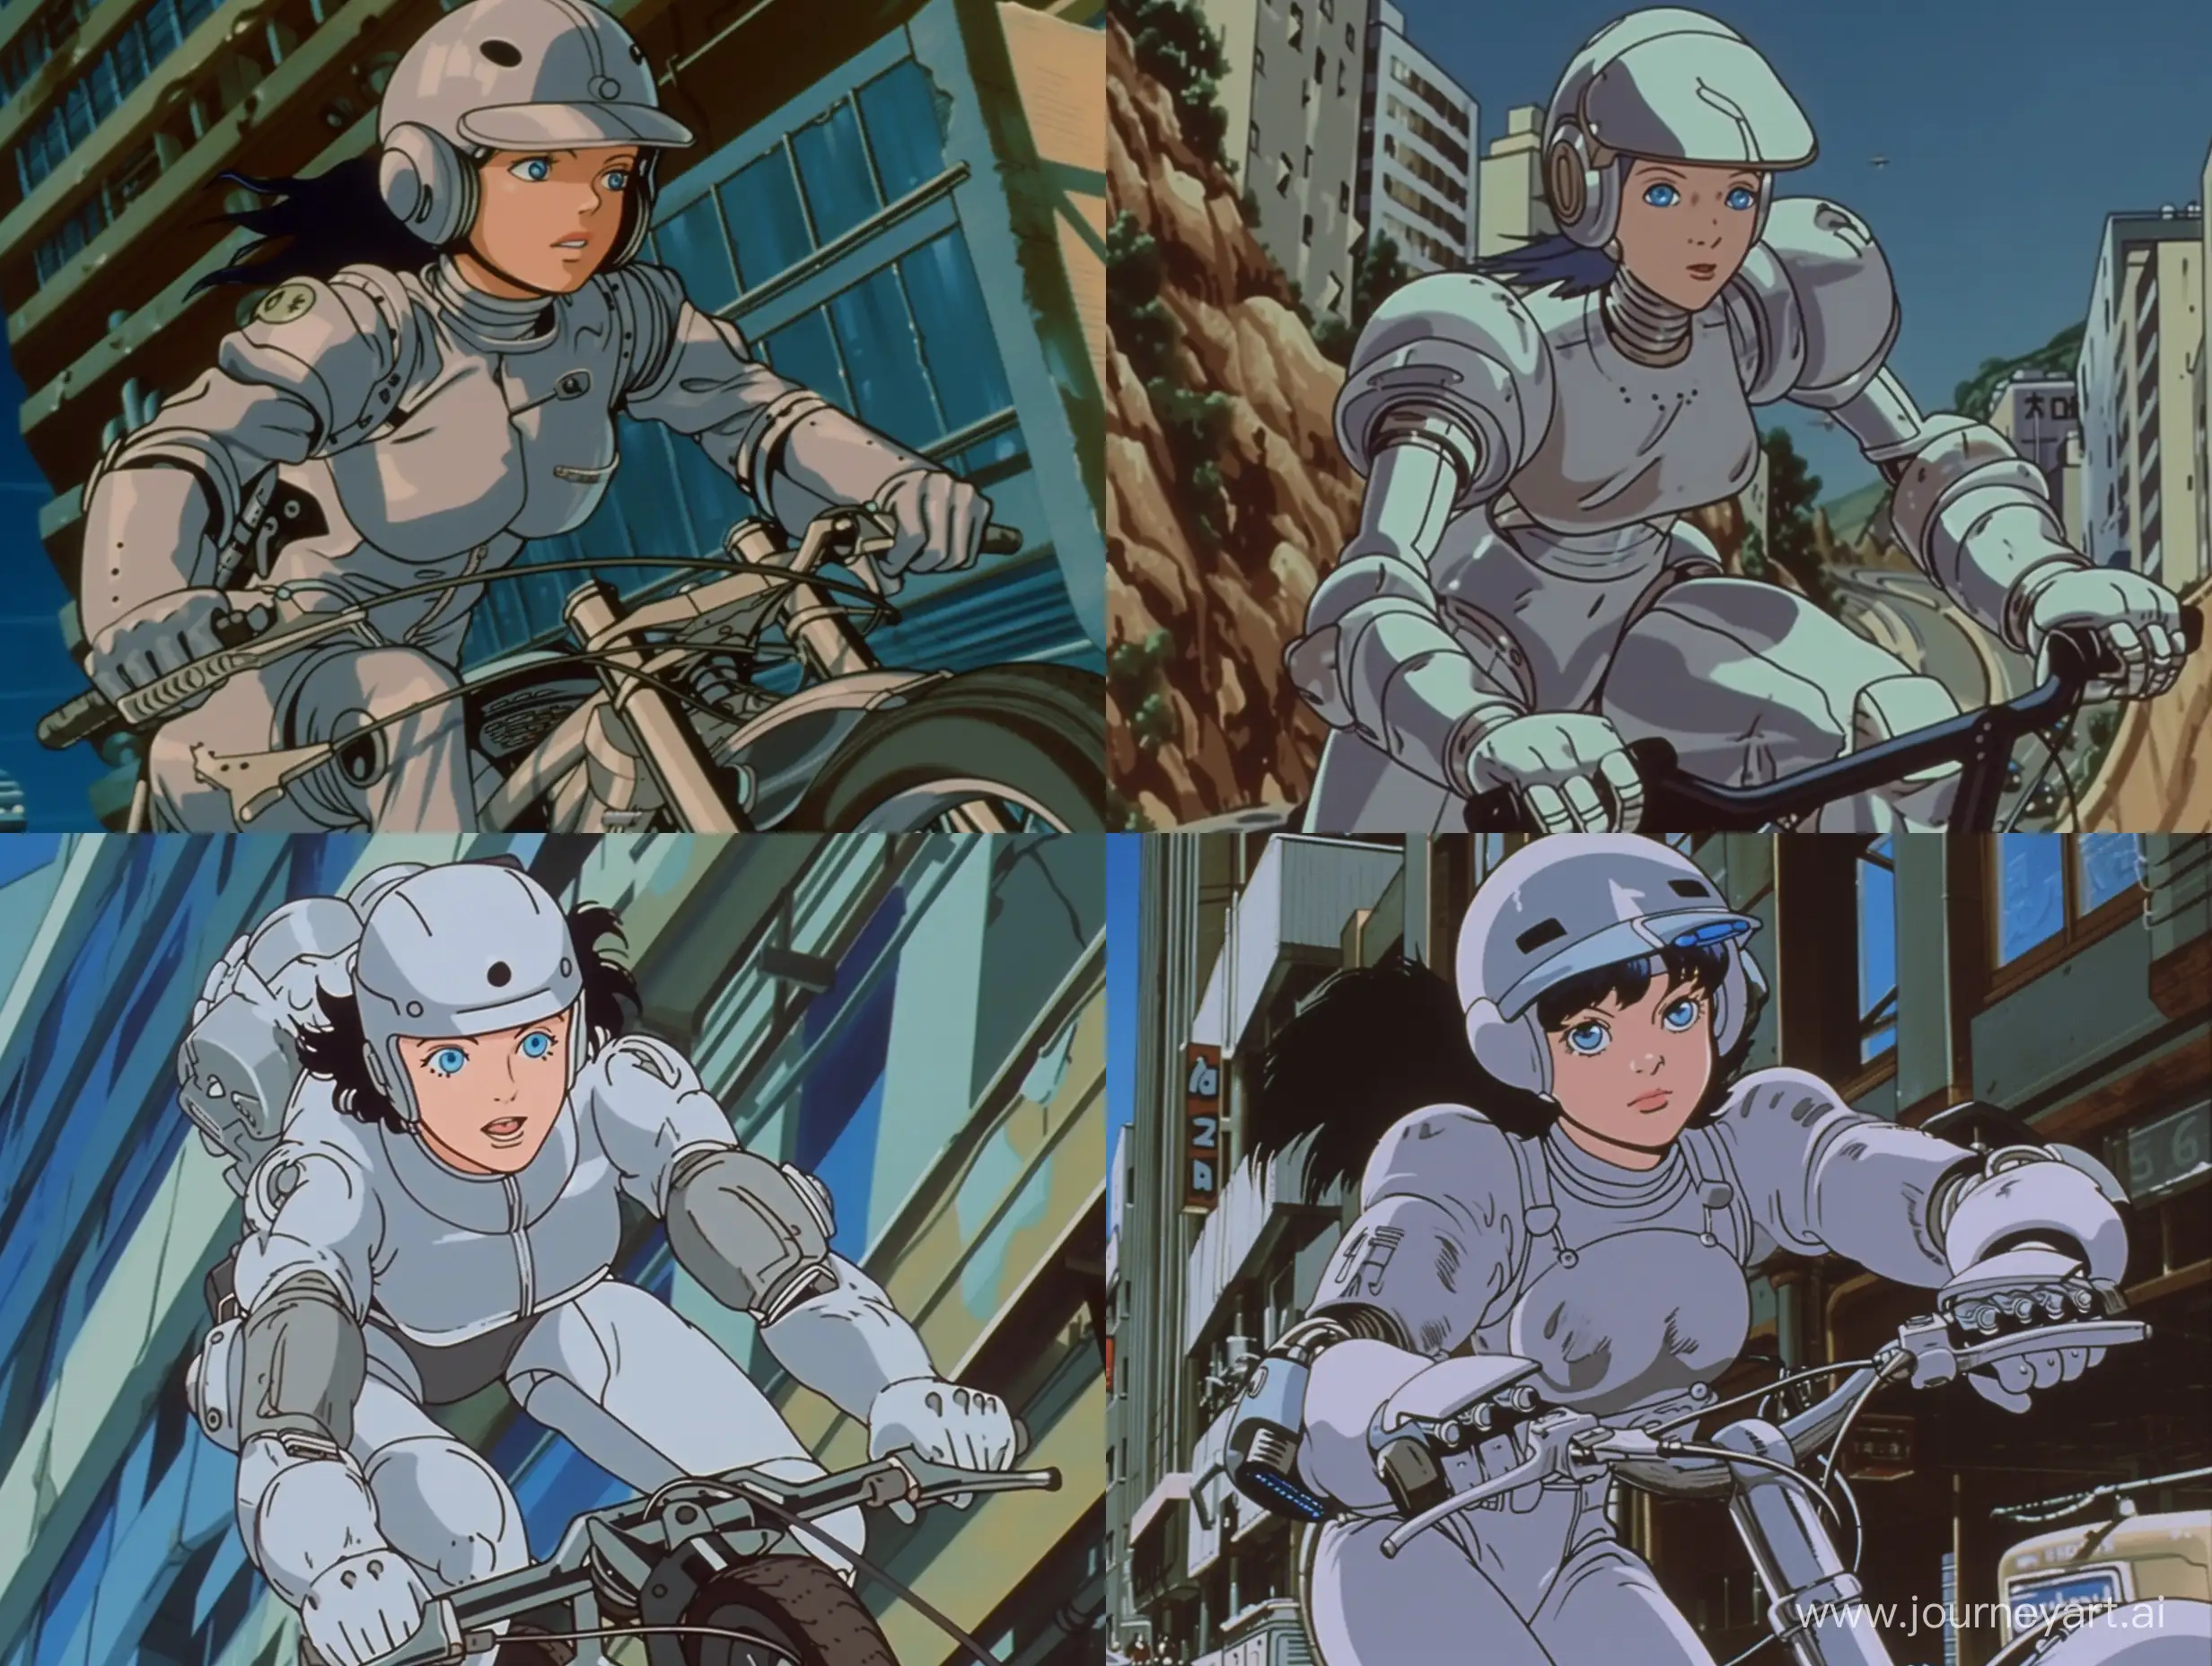 a old 90s cartoon still of a silver cyborg woman riding on her bike, nostalgia, anime, akira 1988 still, they have blue eyes, open area, full body, outside city environment, dystopian,
